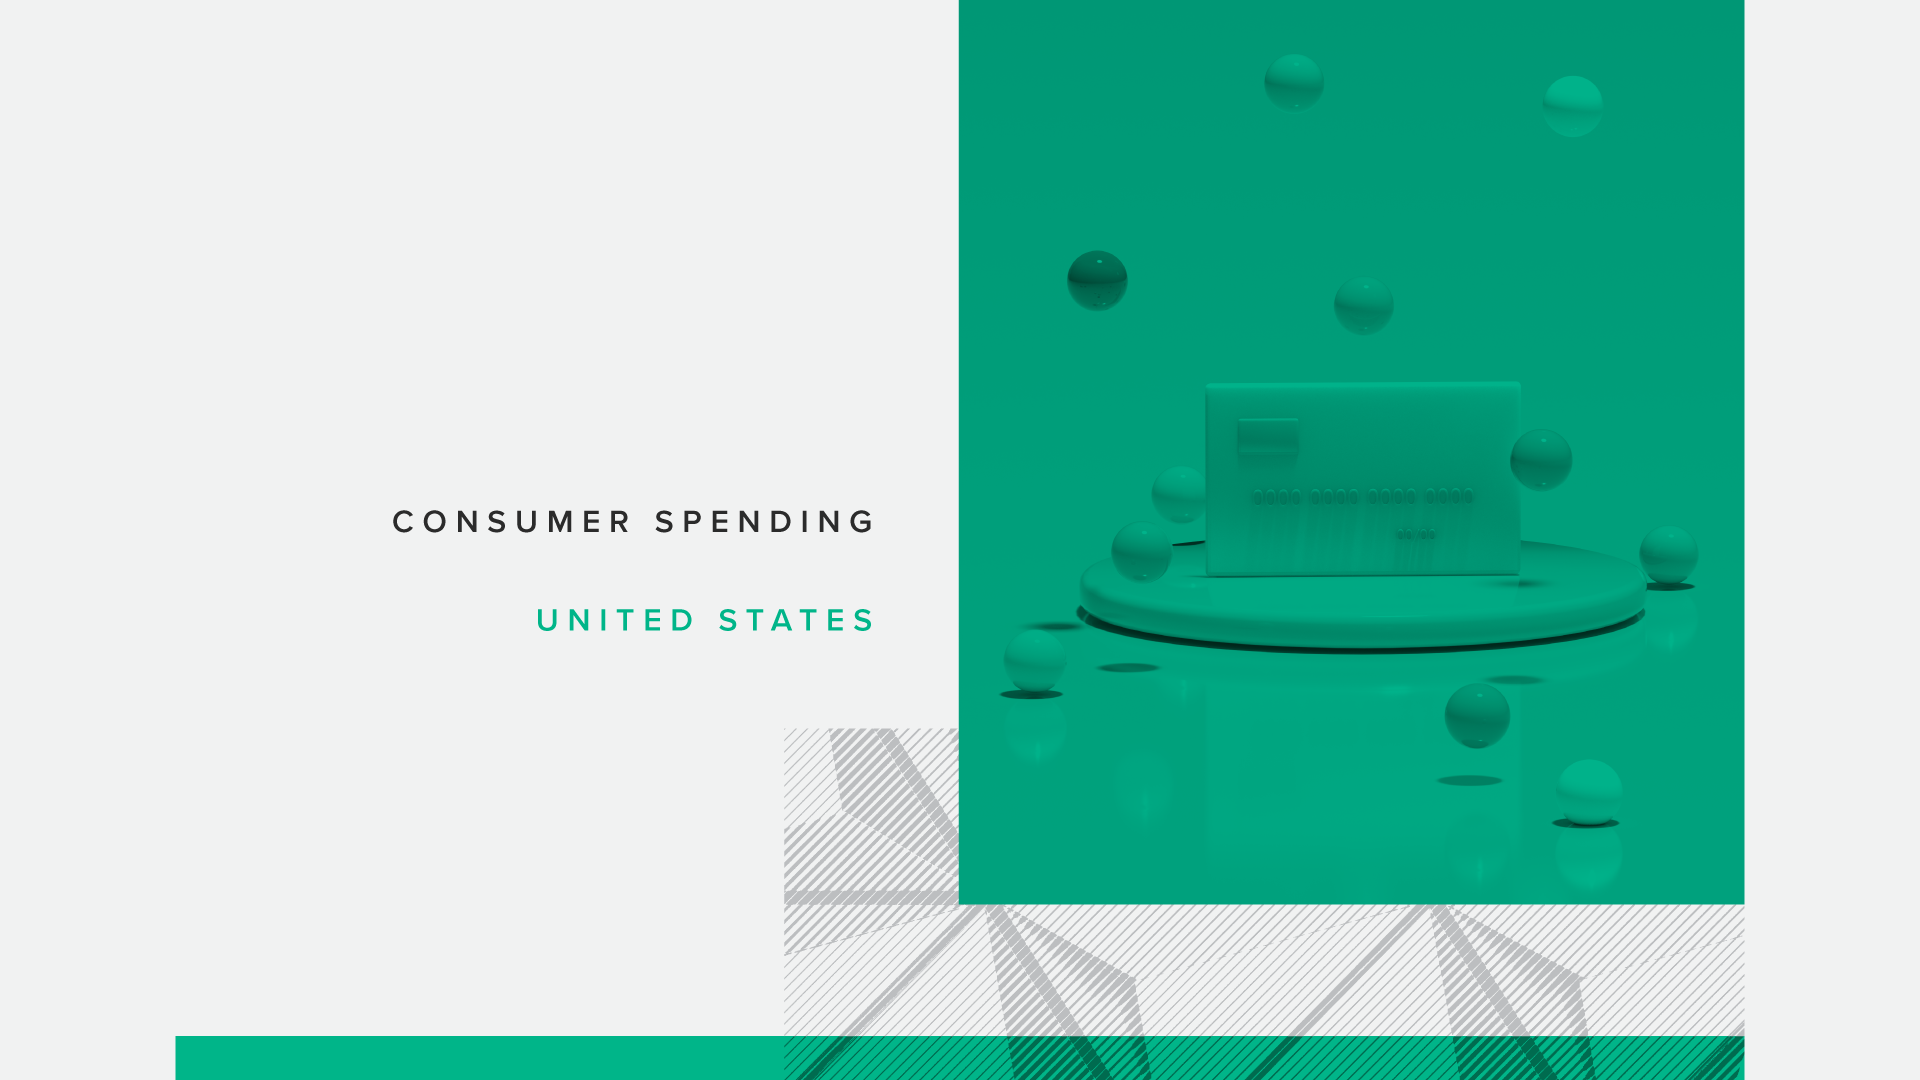 Graphic conveying U.S. Consumer Spending amid inflation